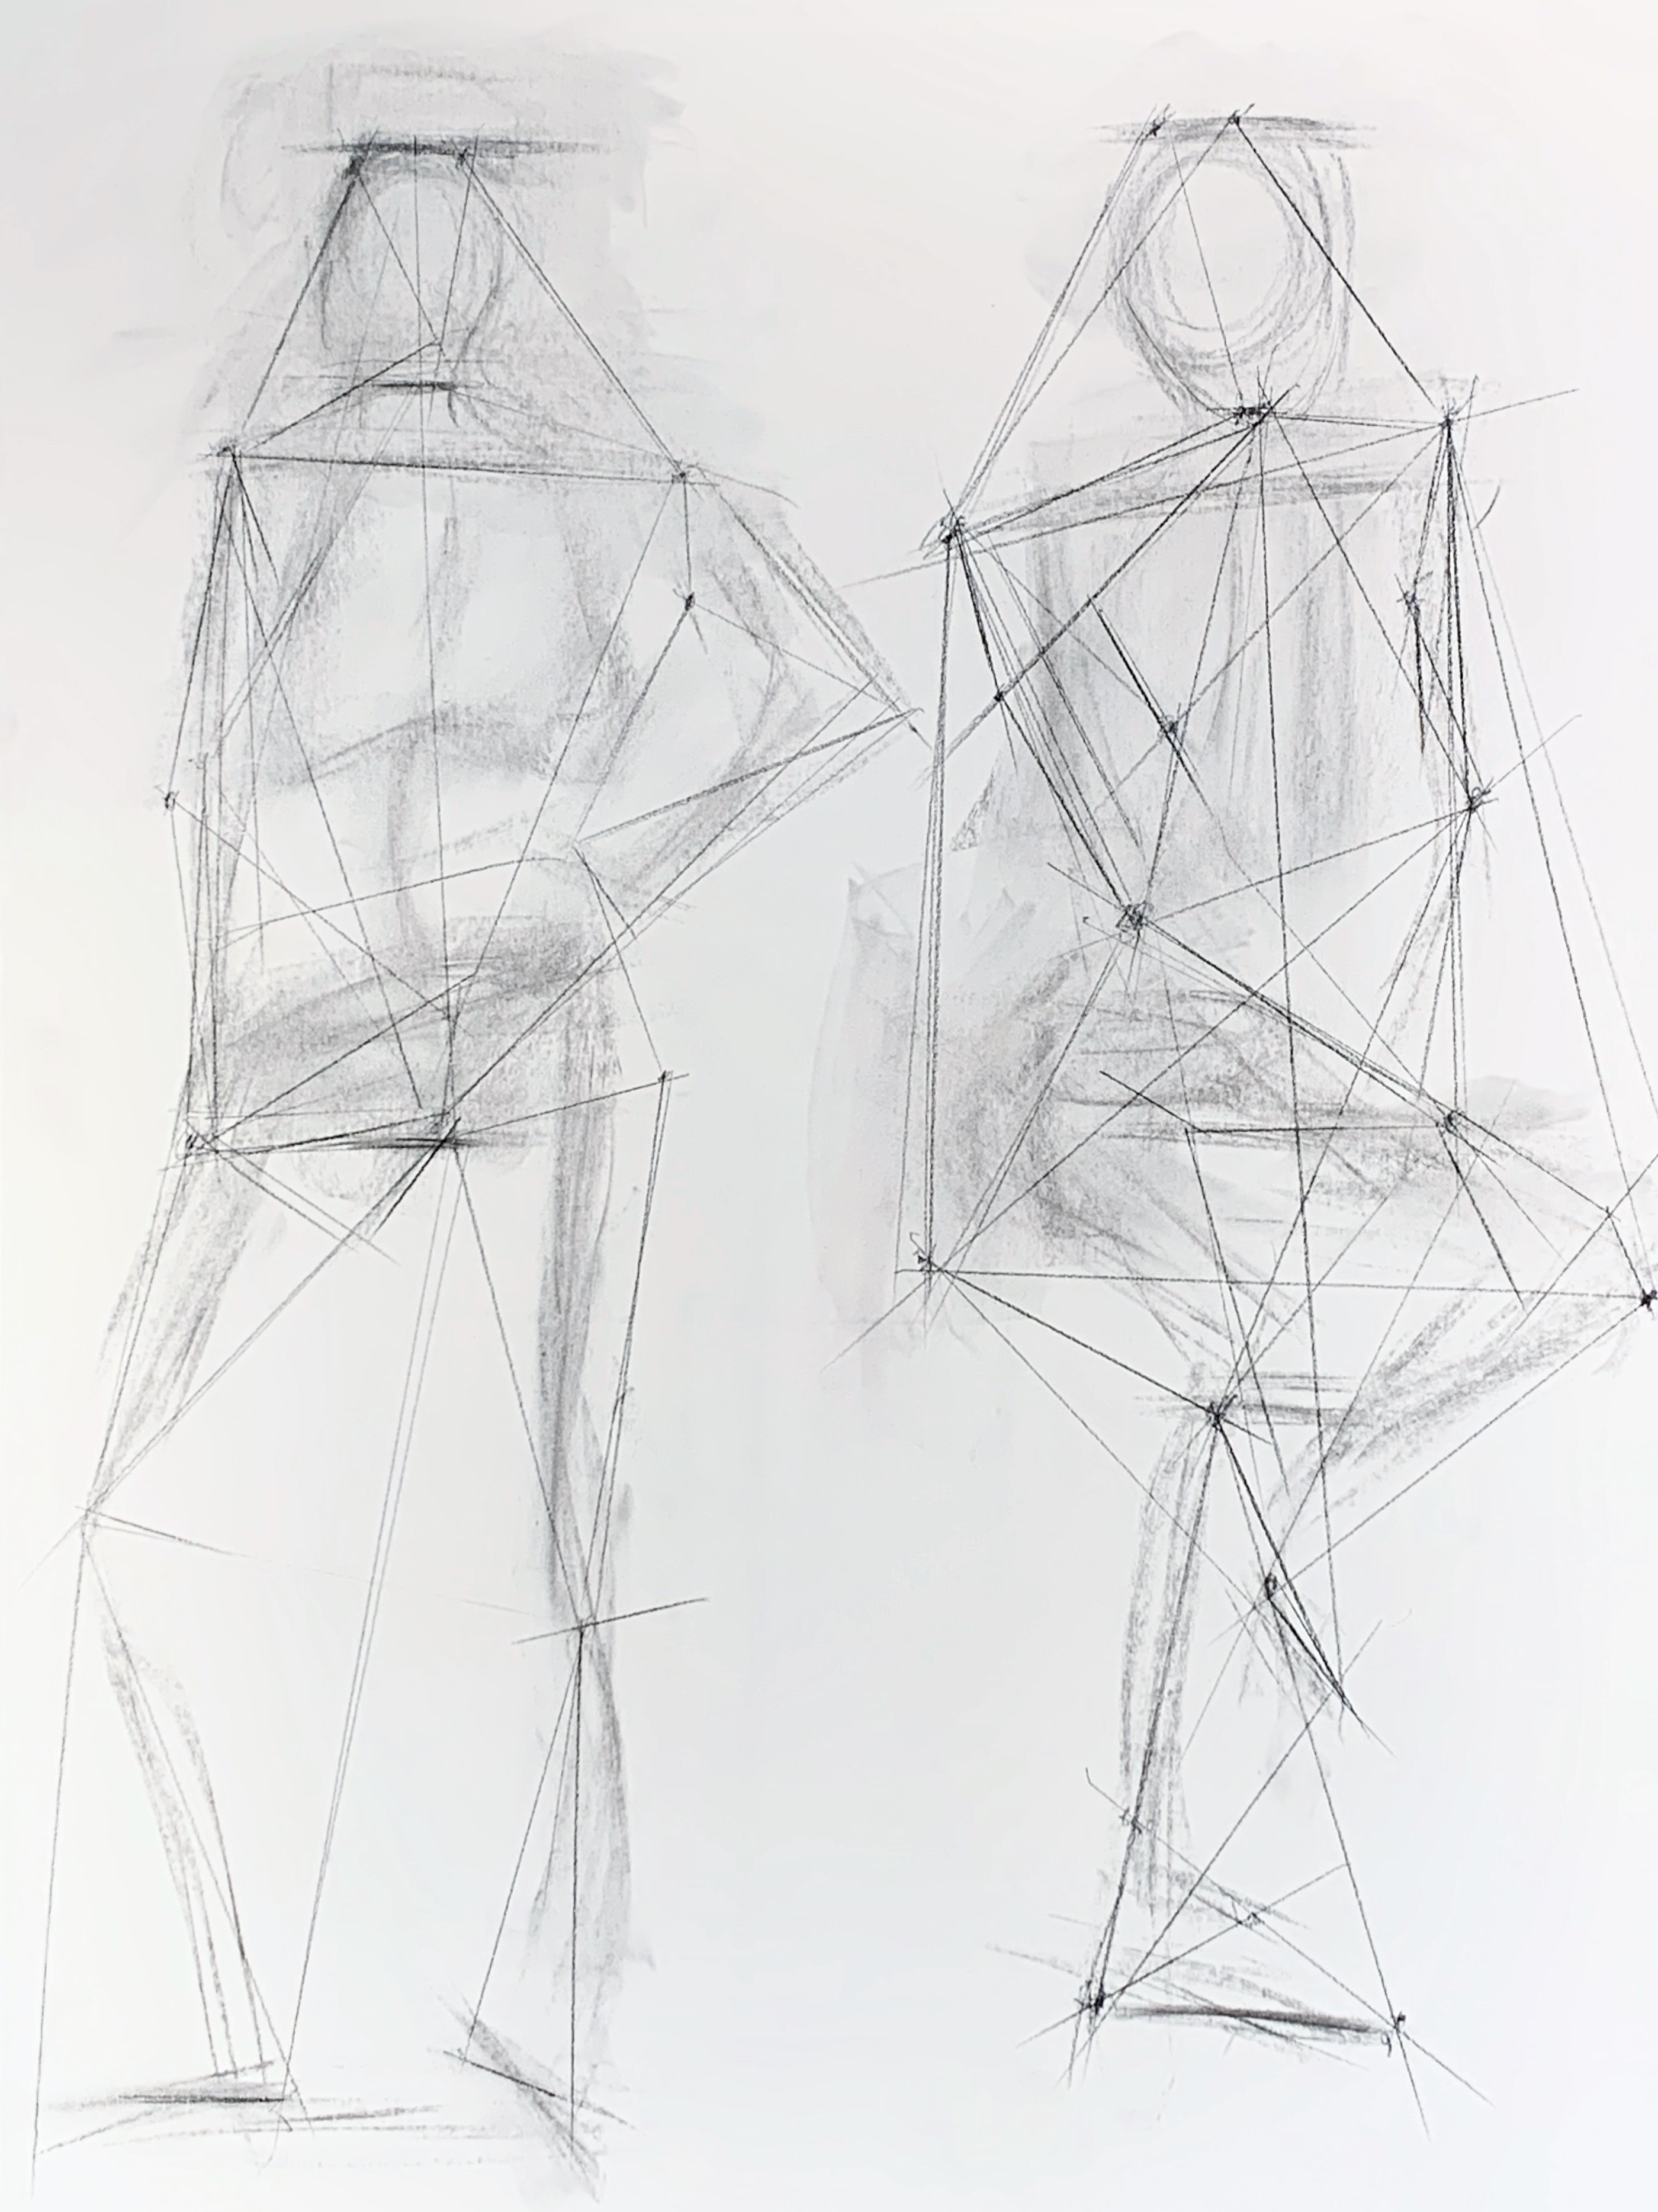 A drawing composed of several lines, outlining the gesture figure of a human- including angles, proportions, and spatial relationships, drawn in vine charcoal.